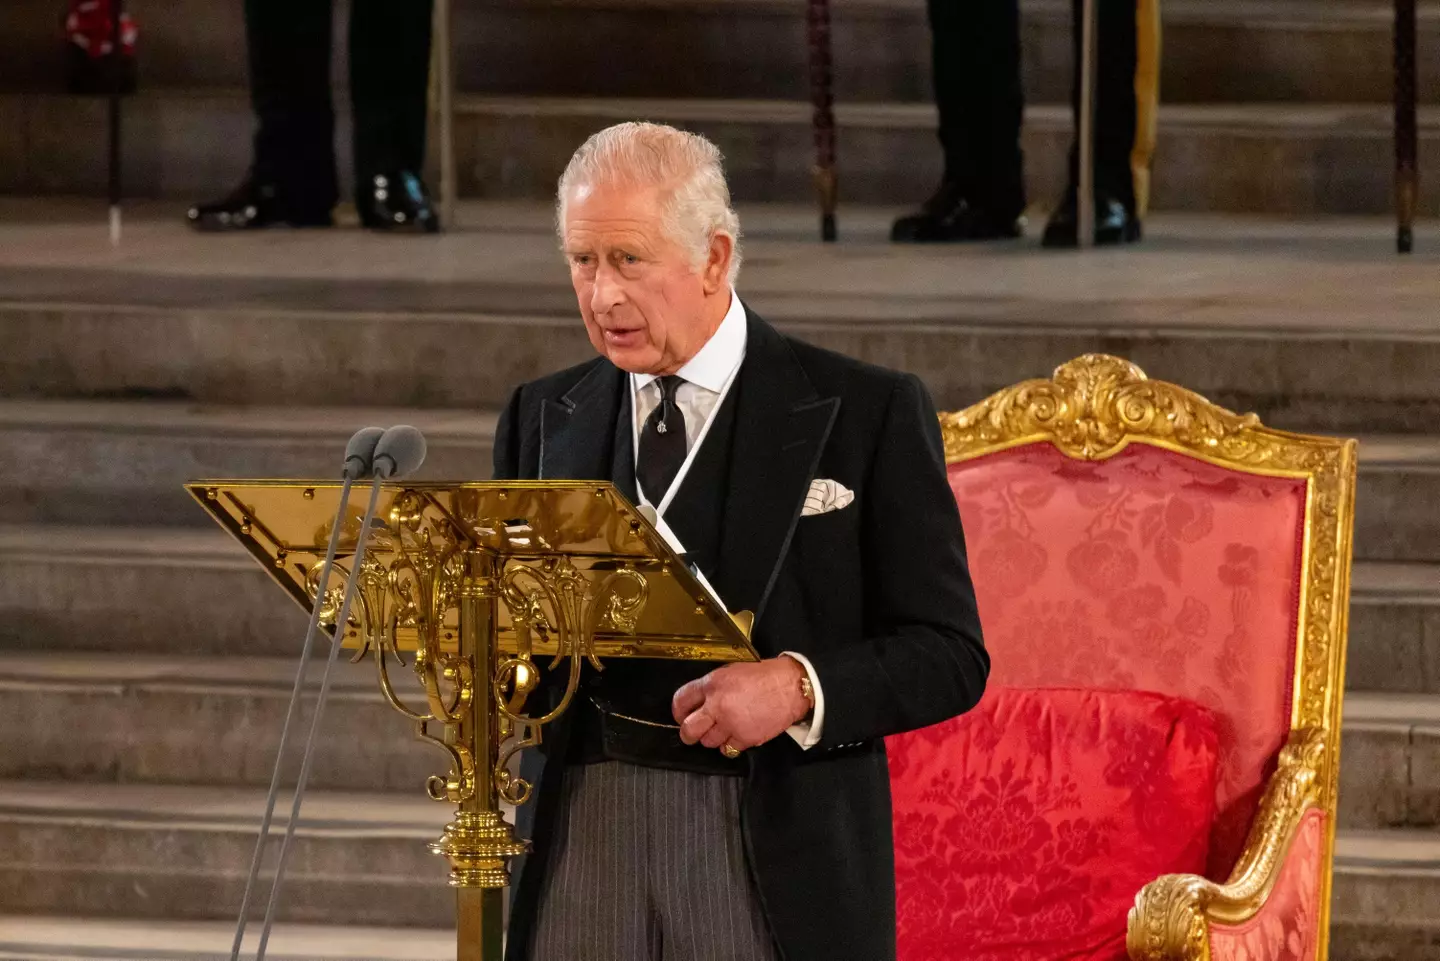 King Charles III was asked why taxpayers should pay for him when they struggled to heat their homes.